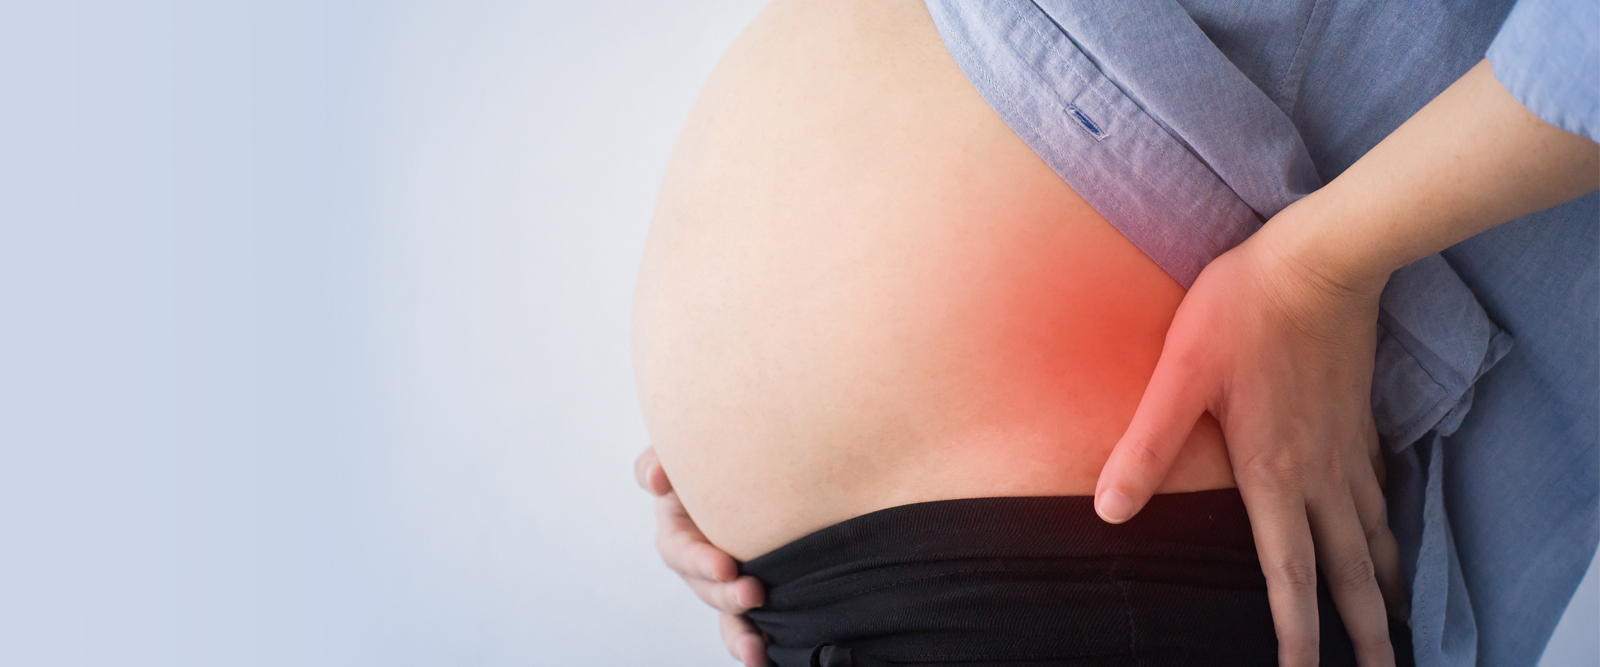 Woman having back pain during pregnancy